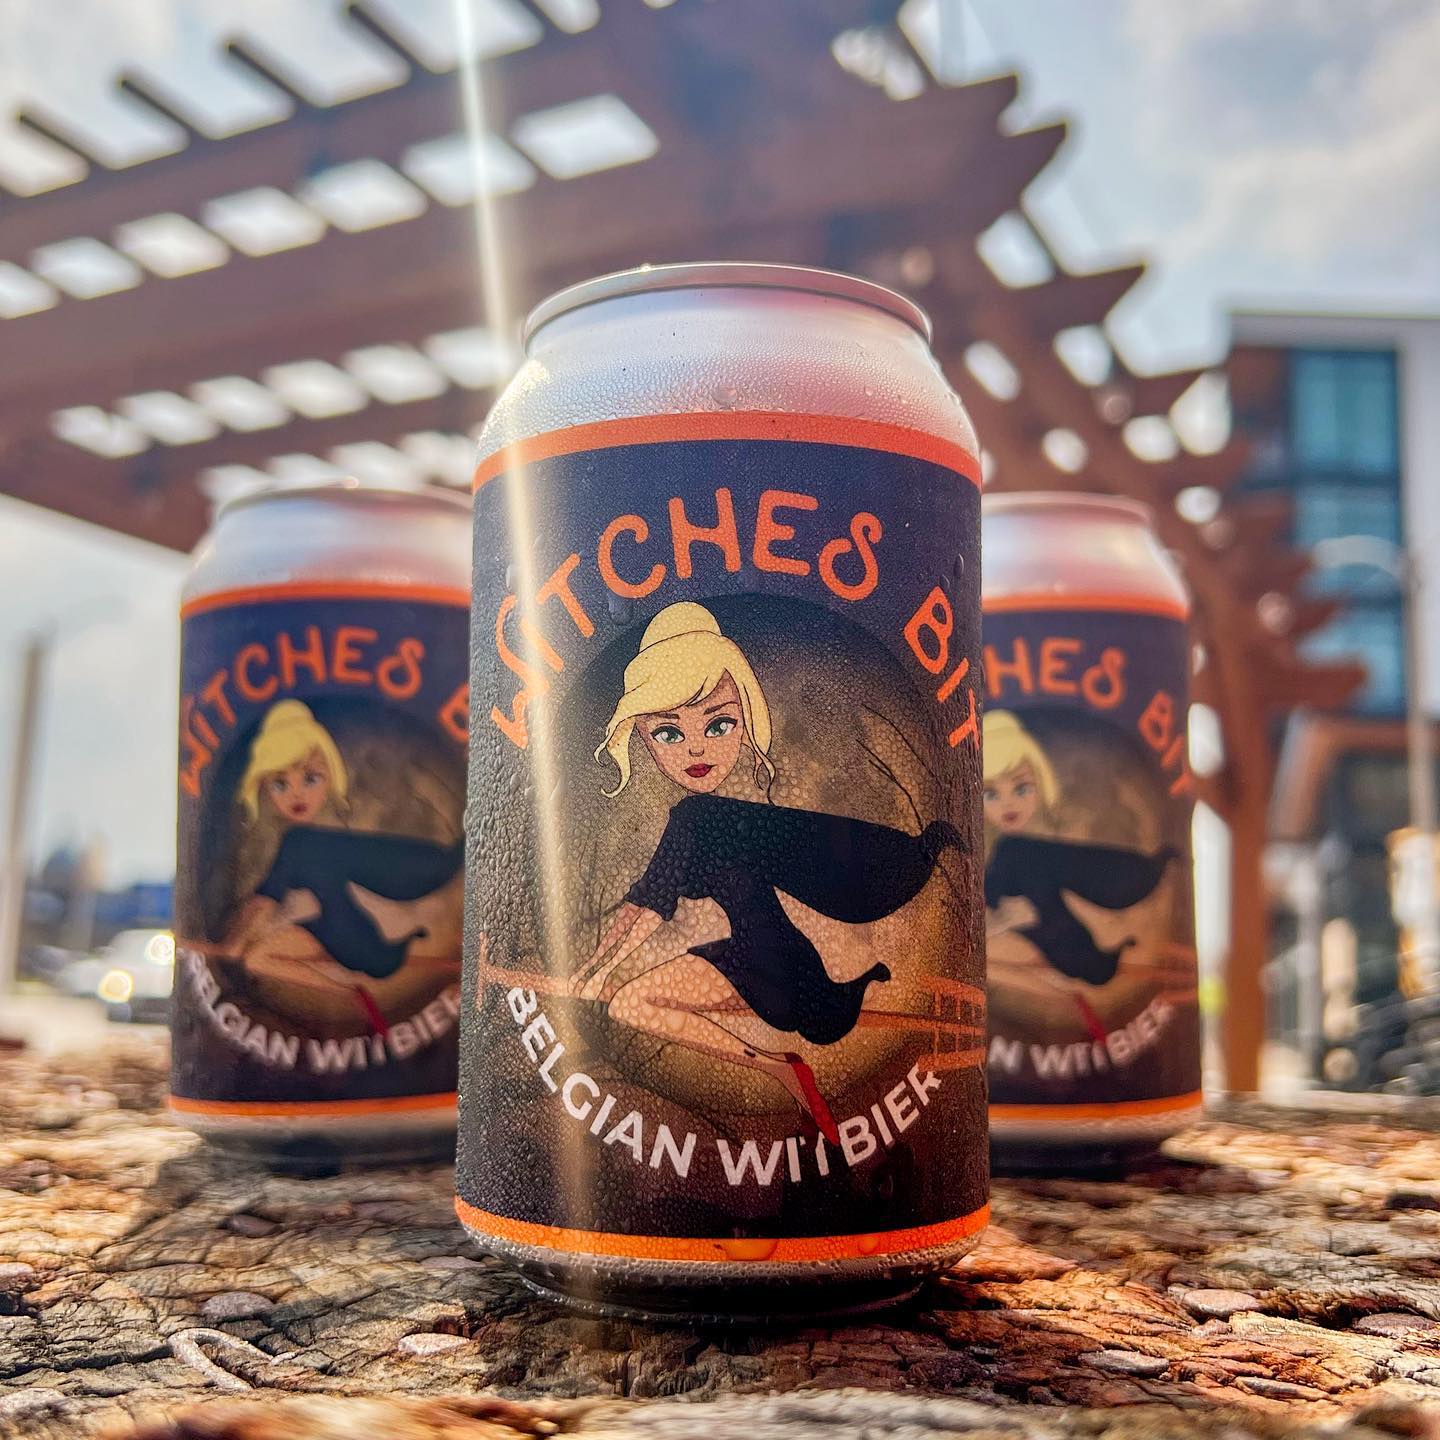 The weather is warming up and patio beers are a go.☀️ It's officially the season of the witch, and you can now get it in 6-packs! Our Belgian Witbier is the perfect balance of drinkability and bold flavor. Brewed with chamomile, lemongrass, orange peel & coriander, it's the perfect beer to enjoy this summer! Stop in the taproom to grab a pint and take home a 6-pack to celebrate this beautiful summer-like weather!🍻 Open today at 5.